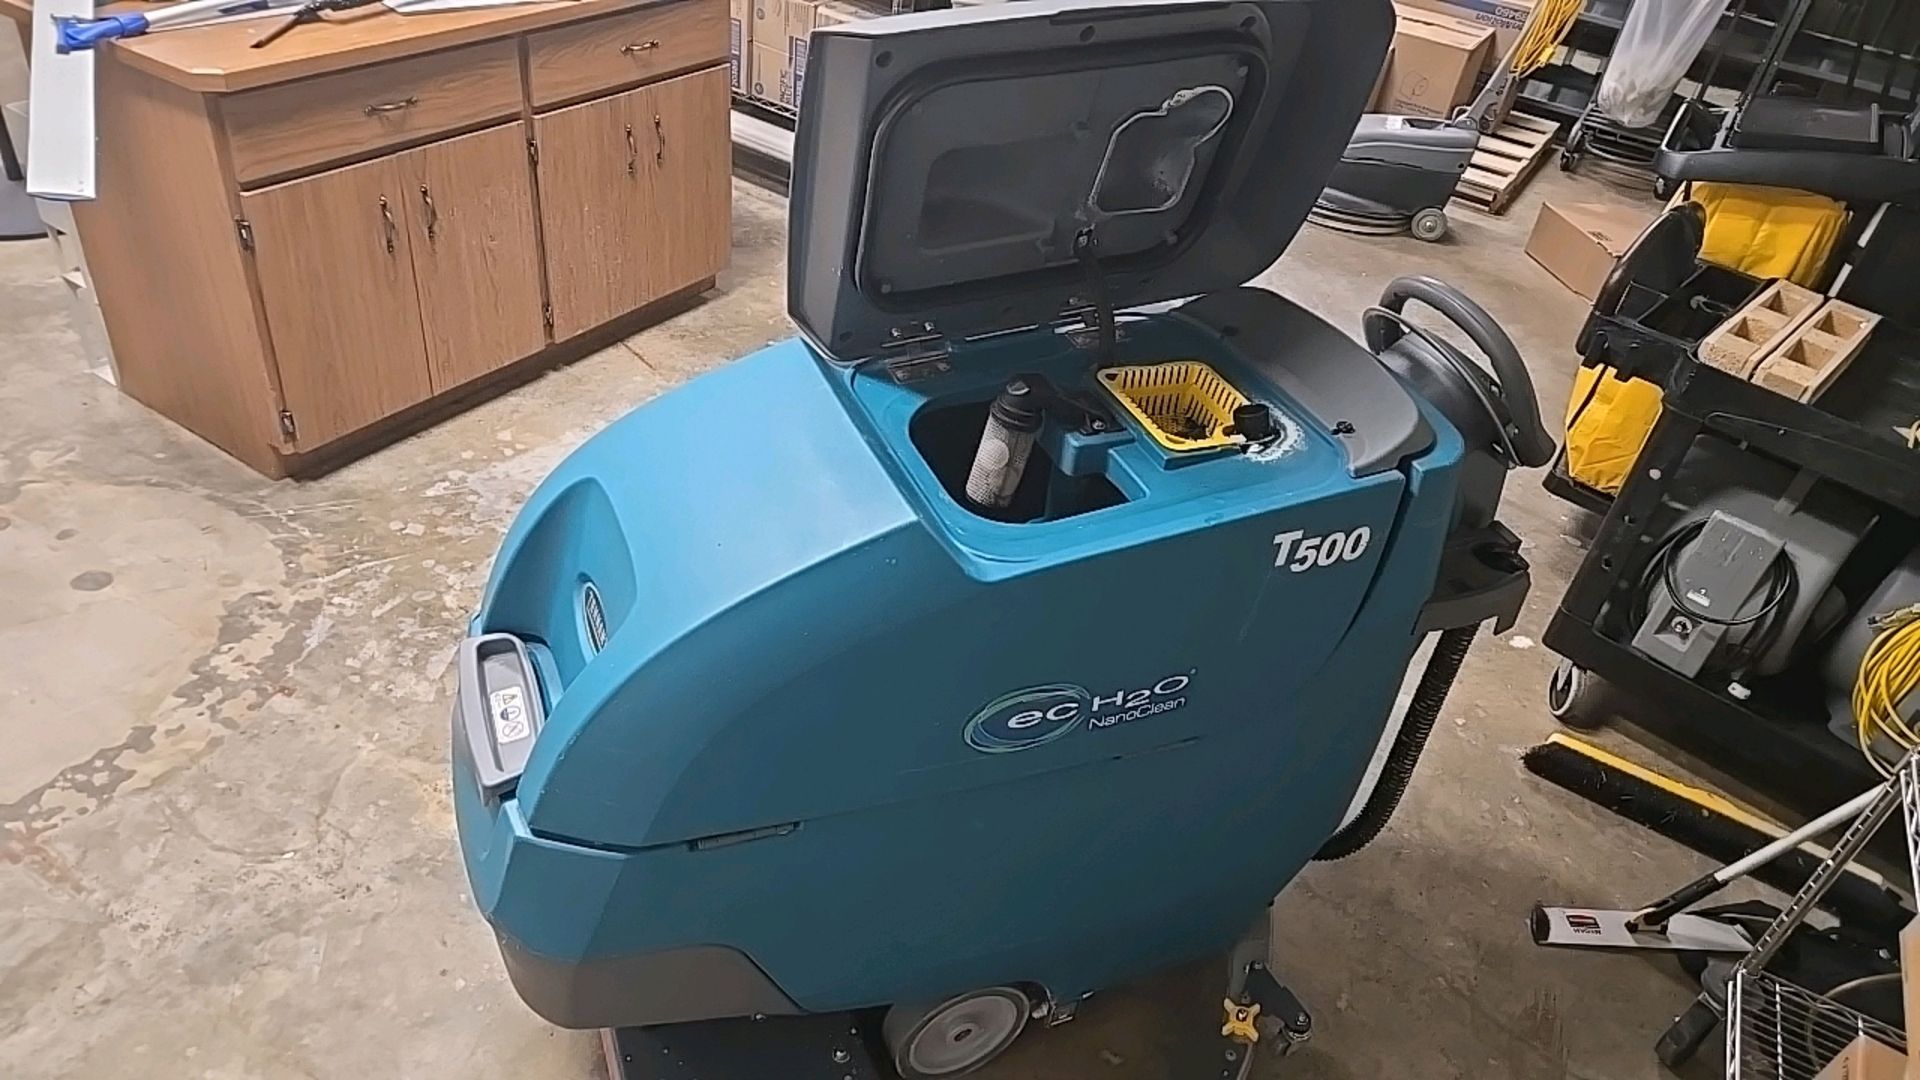 TENNANT T500 FLOOR SCRUBBER - Image 4 of 6